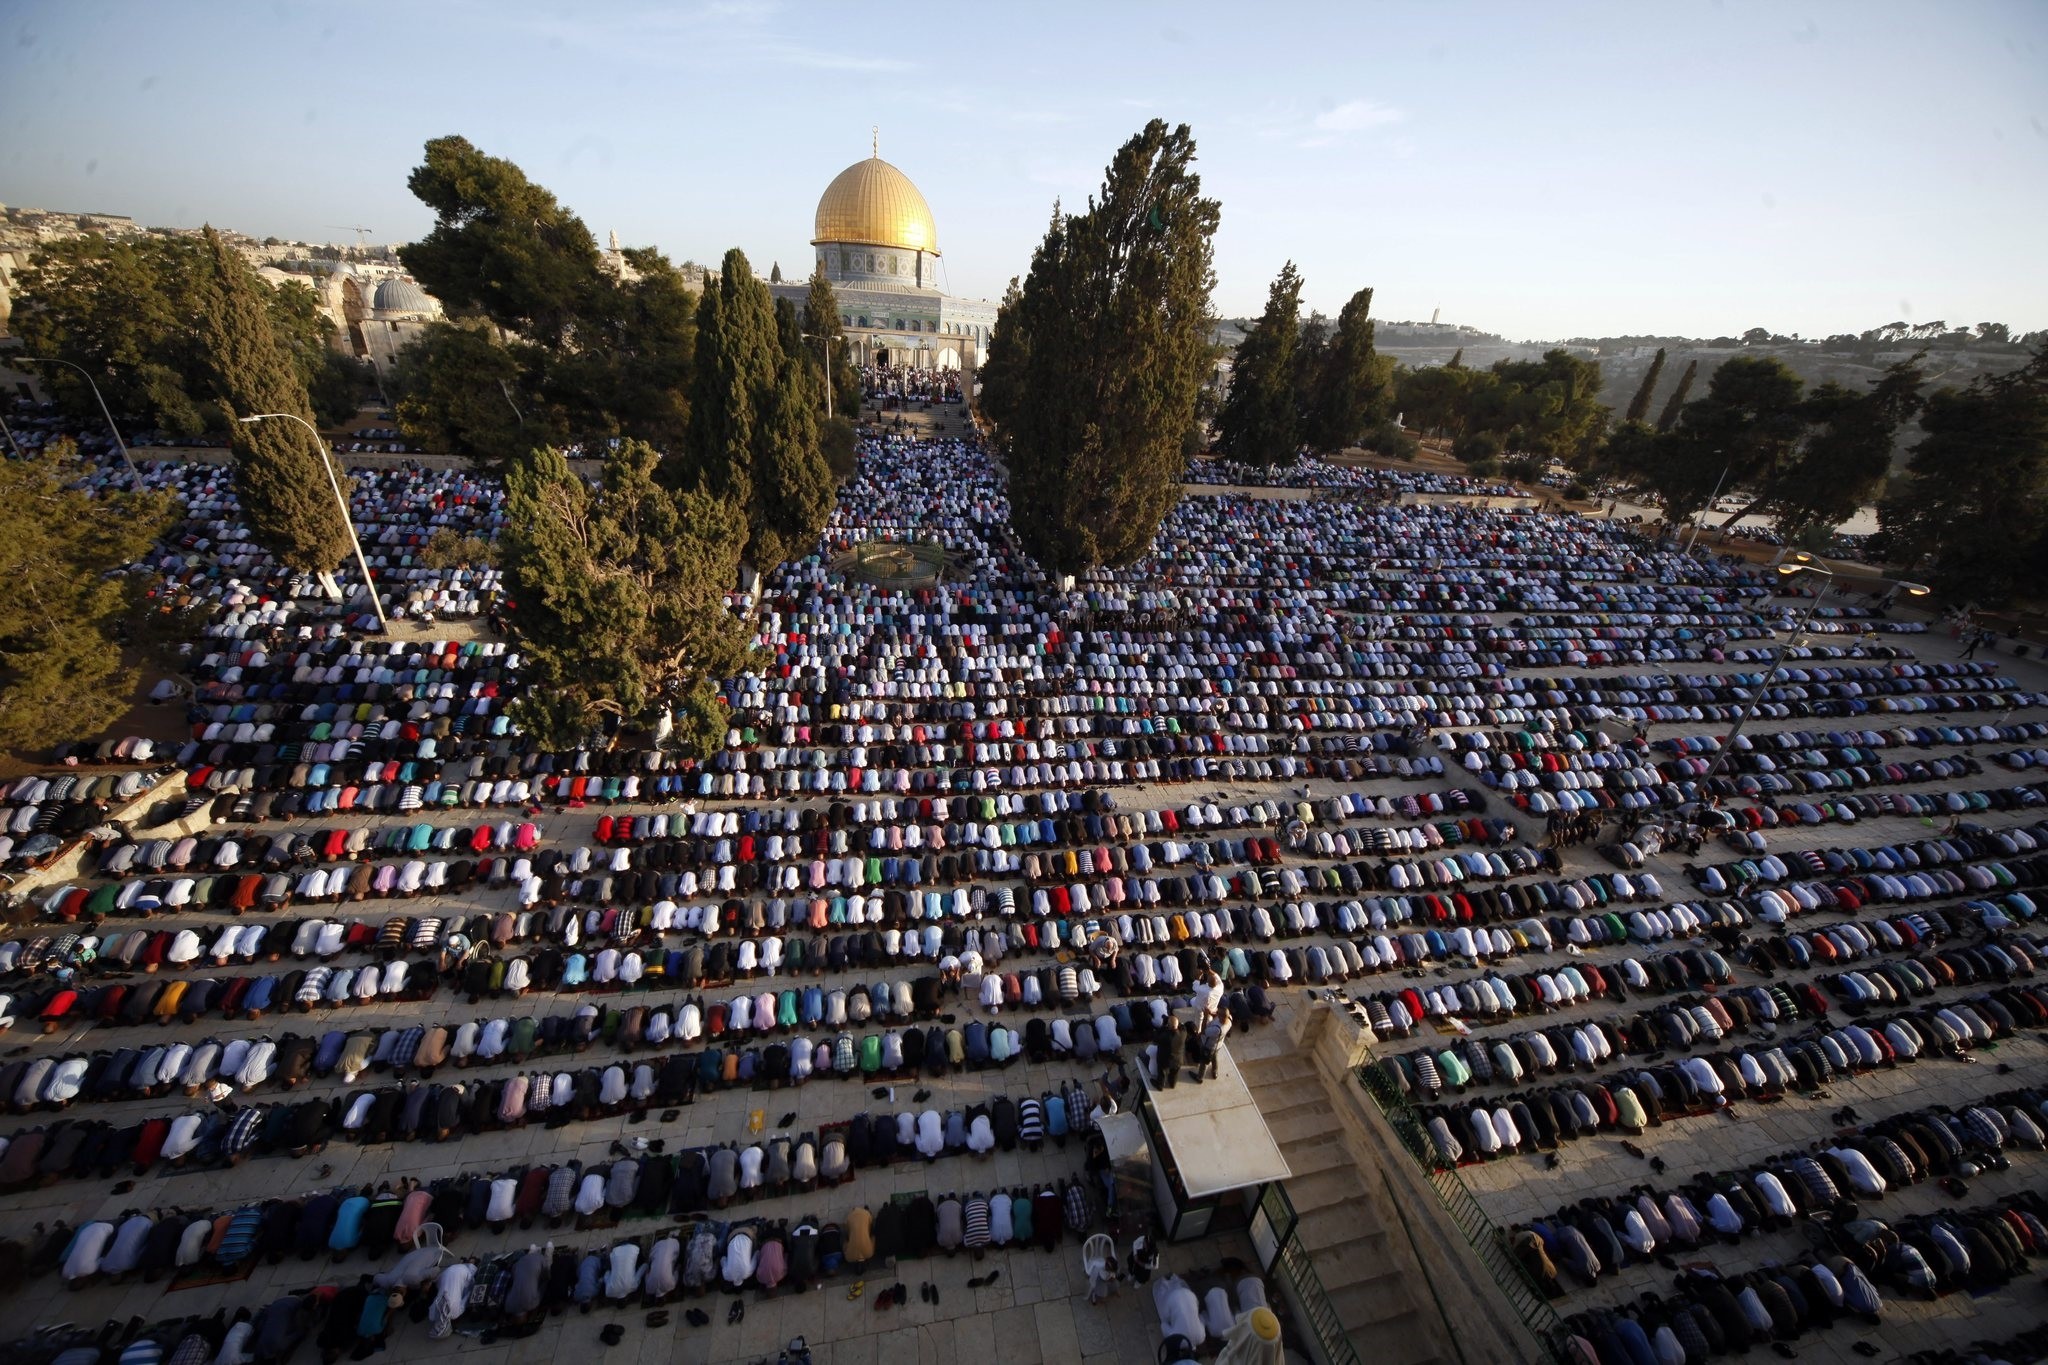 Palestinians pray during the Muslim holiday of Eid al-Adha, near the Dome of the Rock Mosque in the Al Aqsa Mosque compound. (AP Photo)